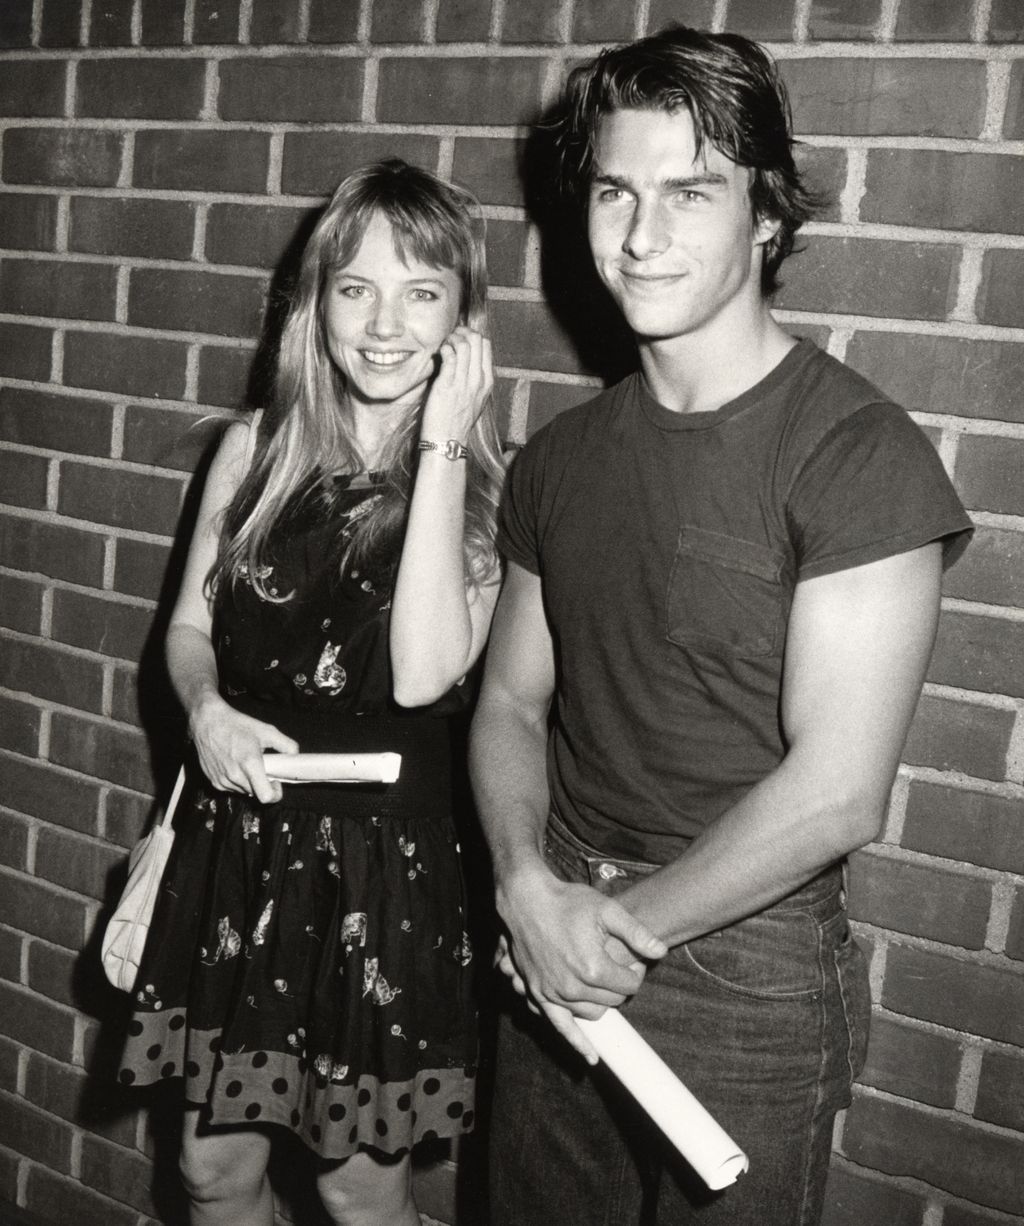 Tom Cruise and Rebecca De Mornay at a screening for Risky Business in 1983